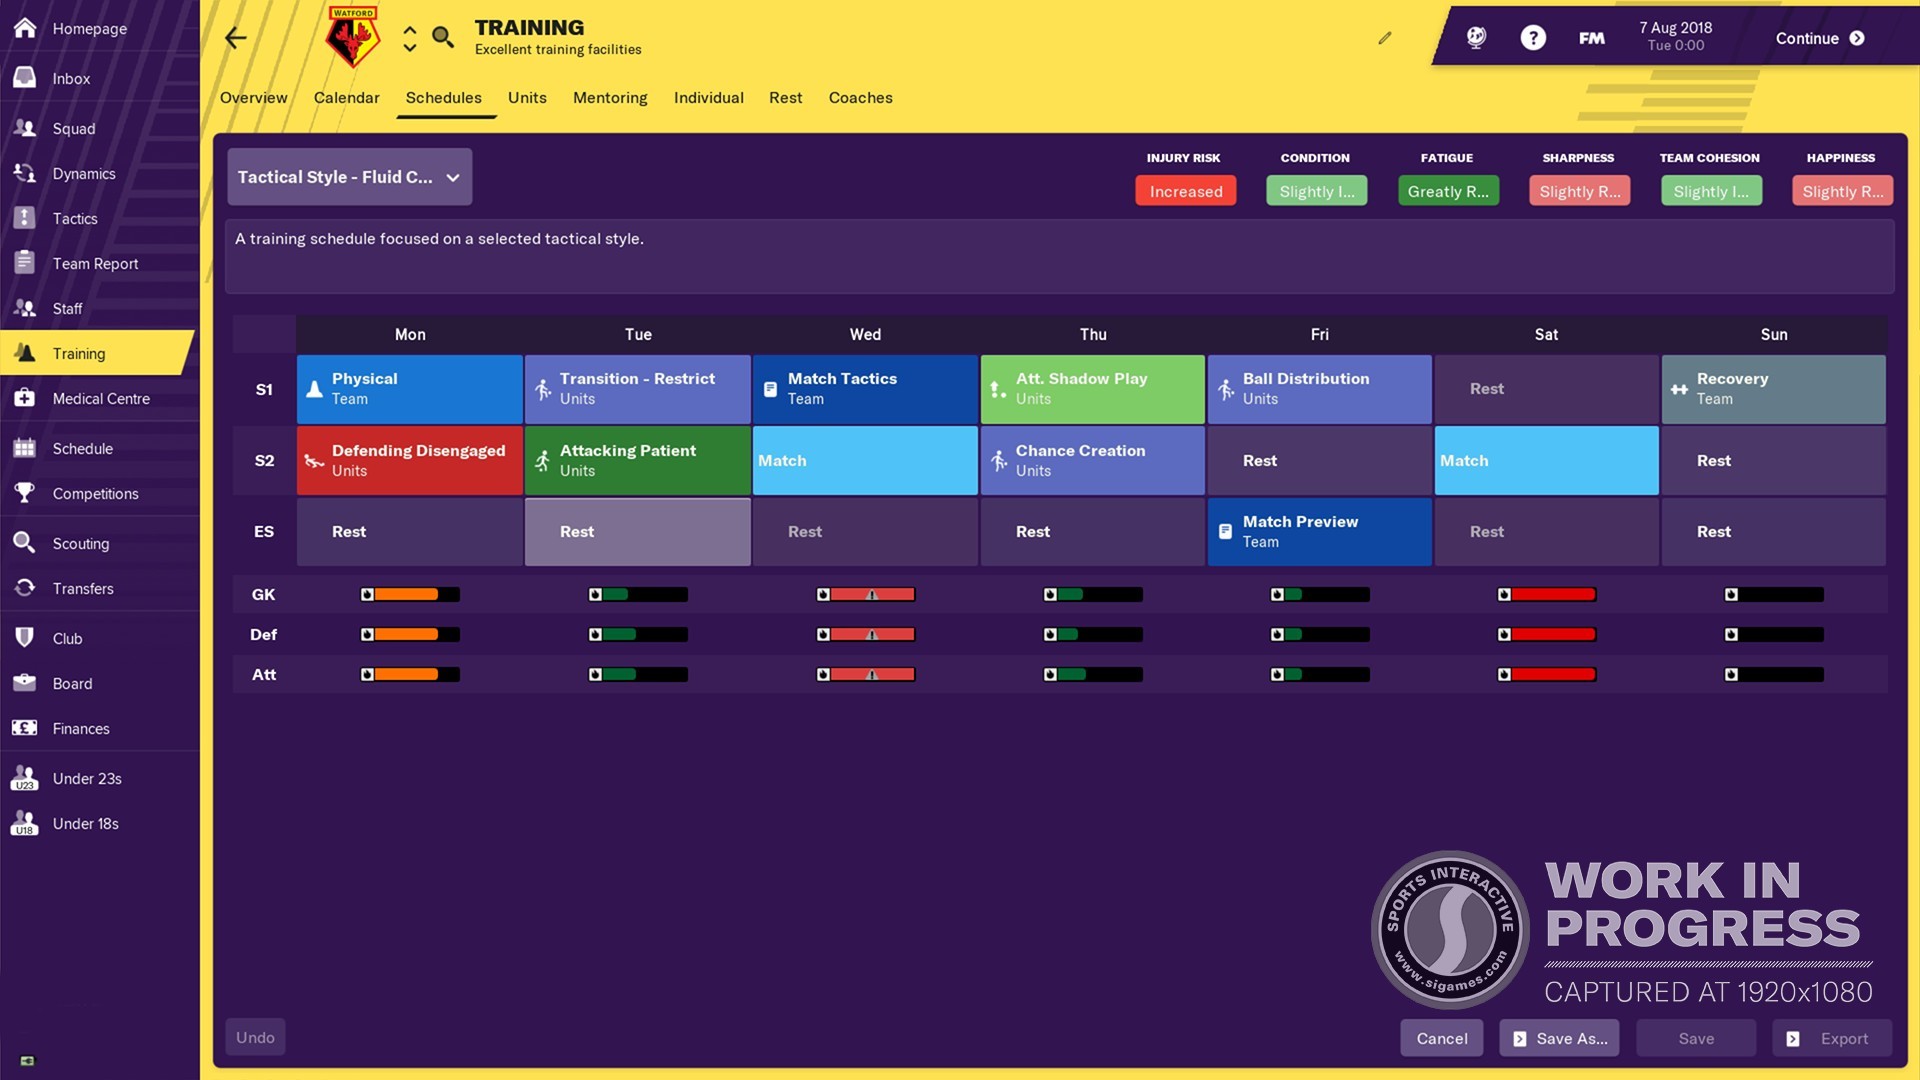 game football manager 2019